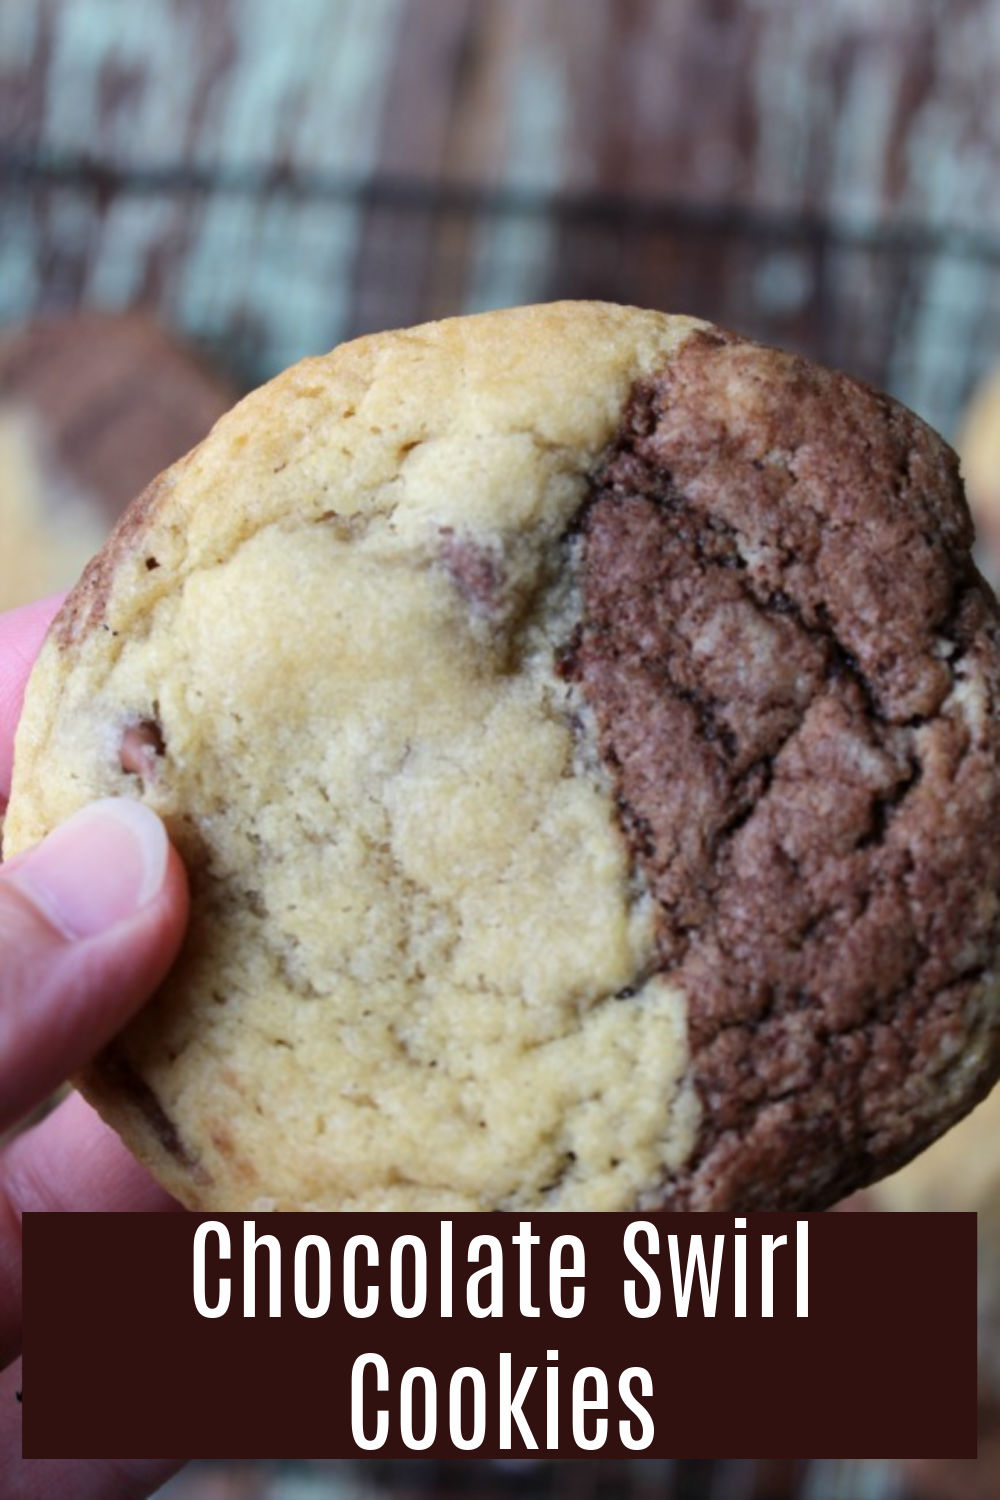 Chocolate swirl cookie with chocolate chips being held by a hand.